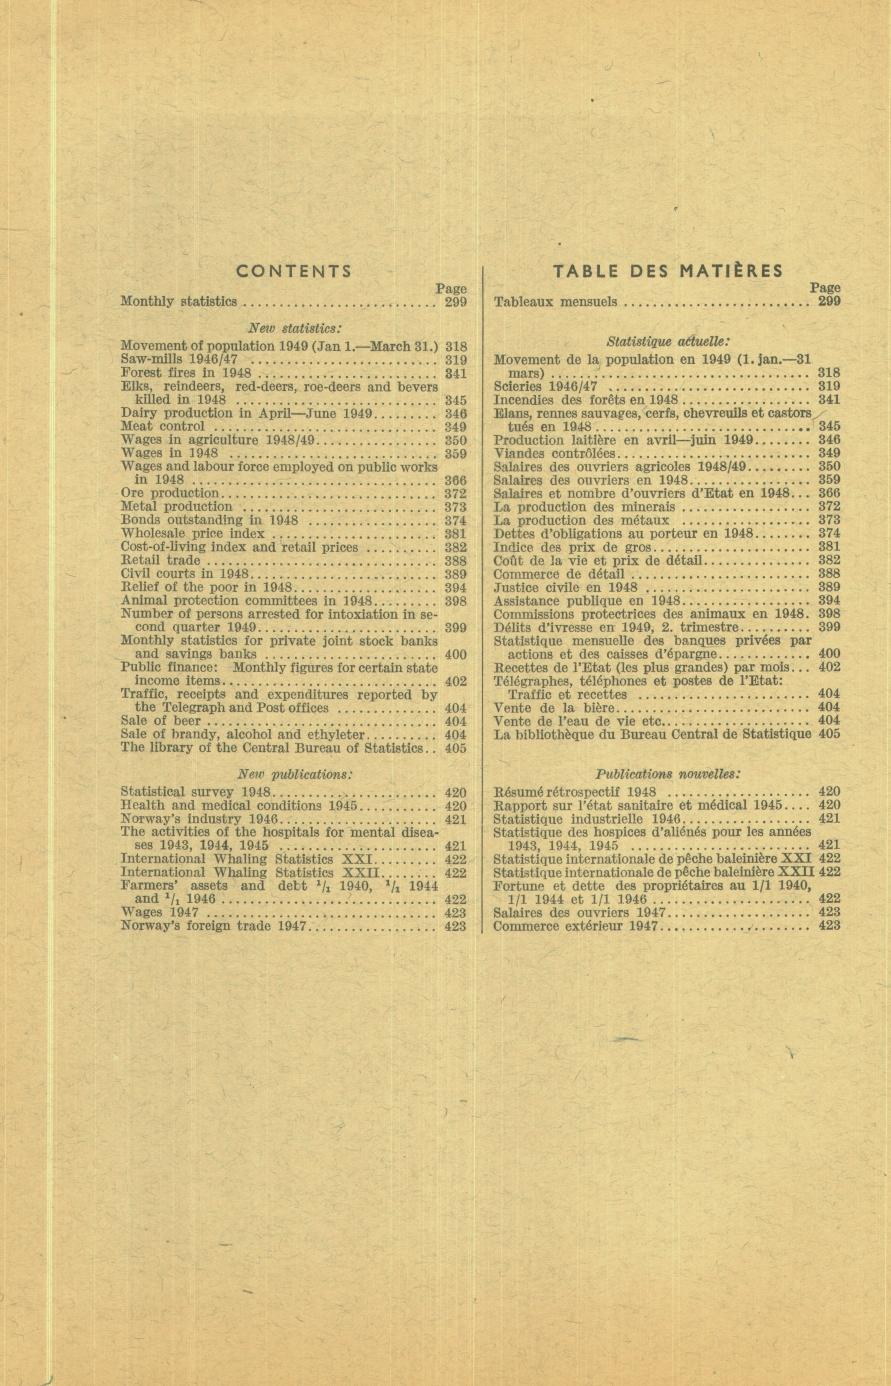 CONTENTS Monthly statistics TABLE DES MATIÈRES Page 299 New statistics: Movement of population 1949 (Jan 1. March 31.